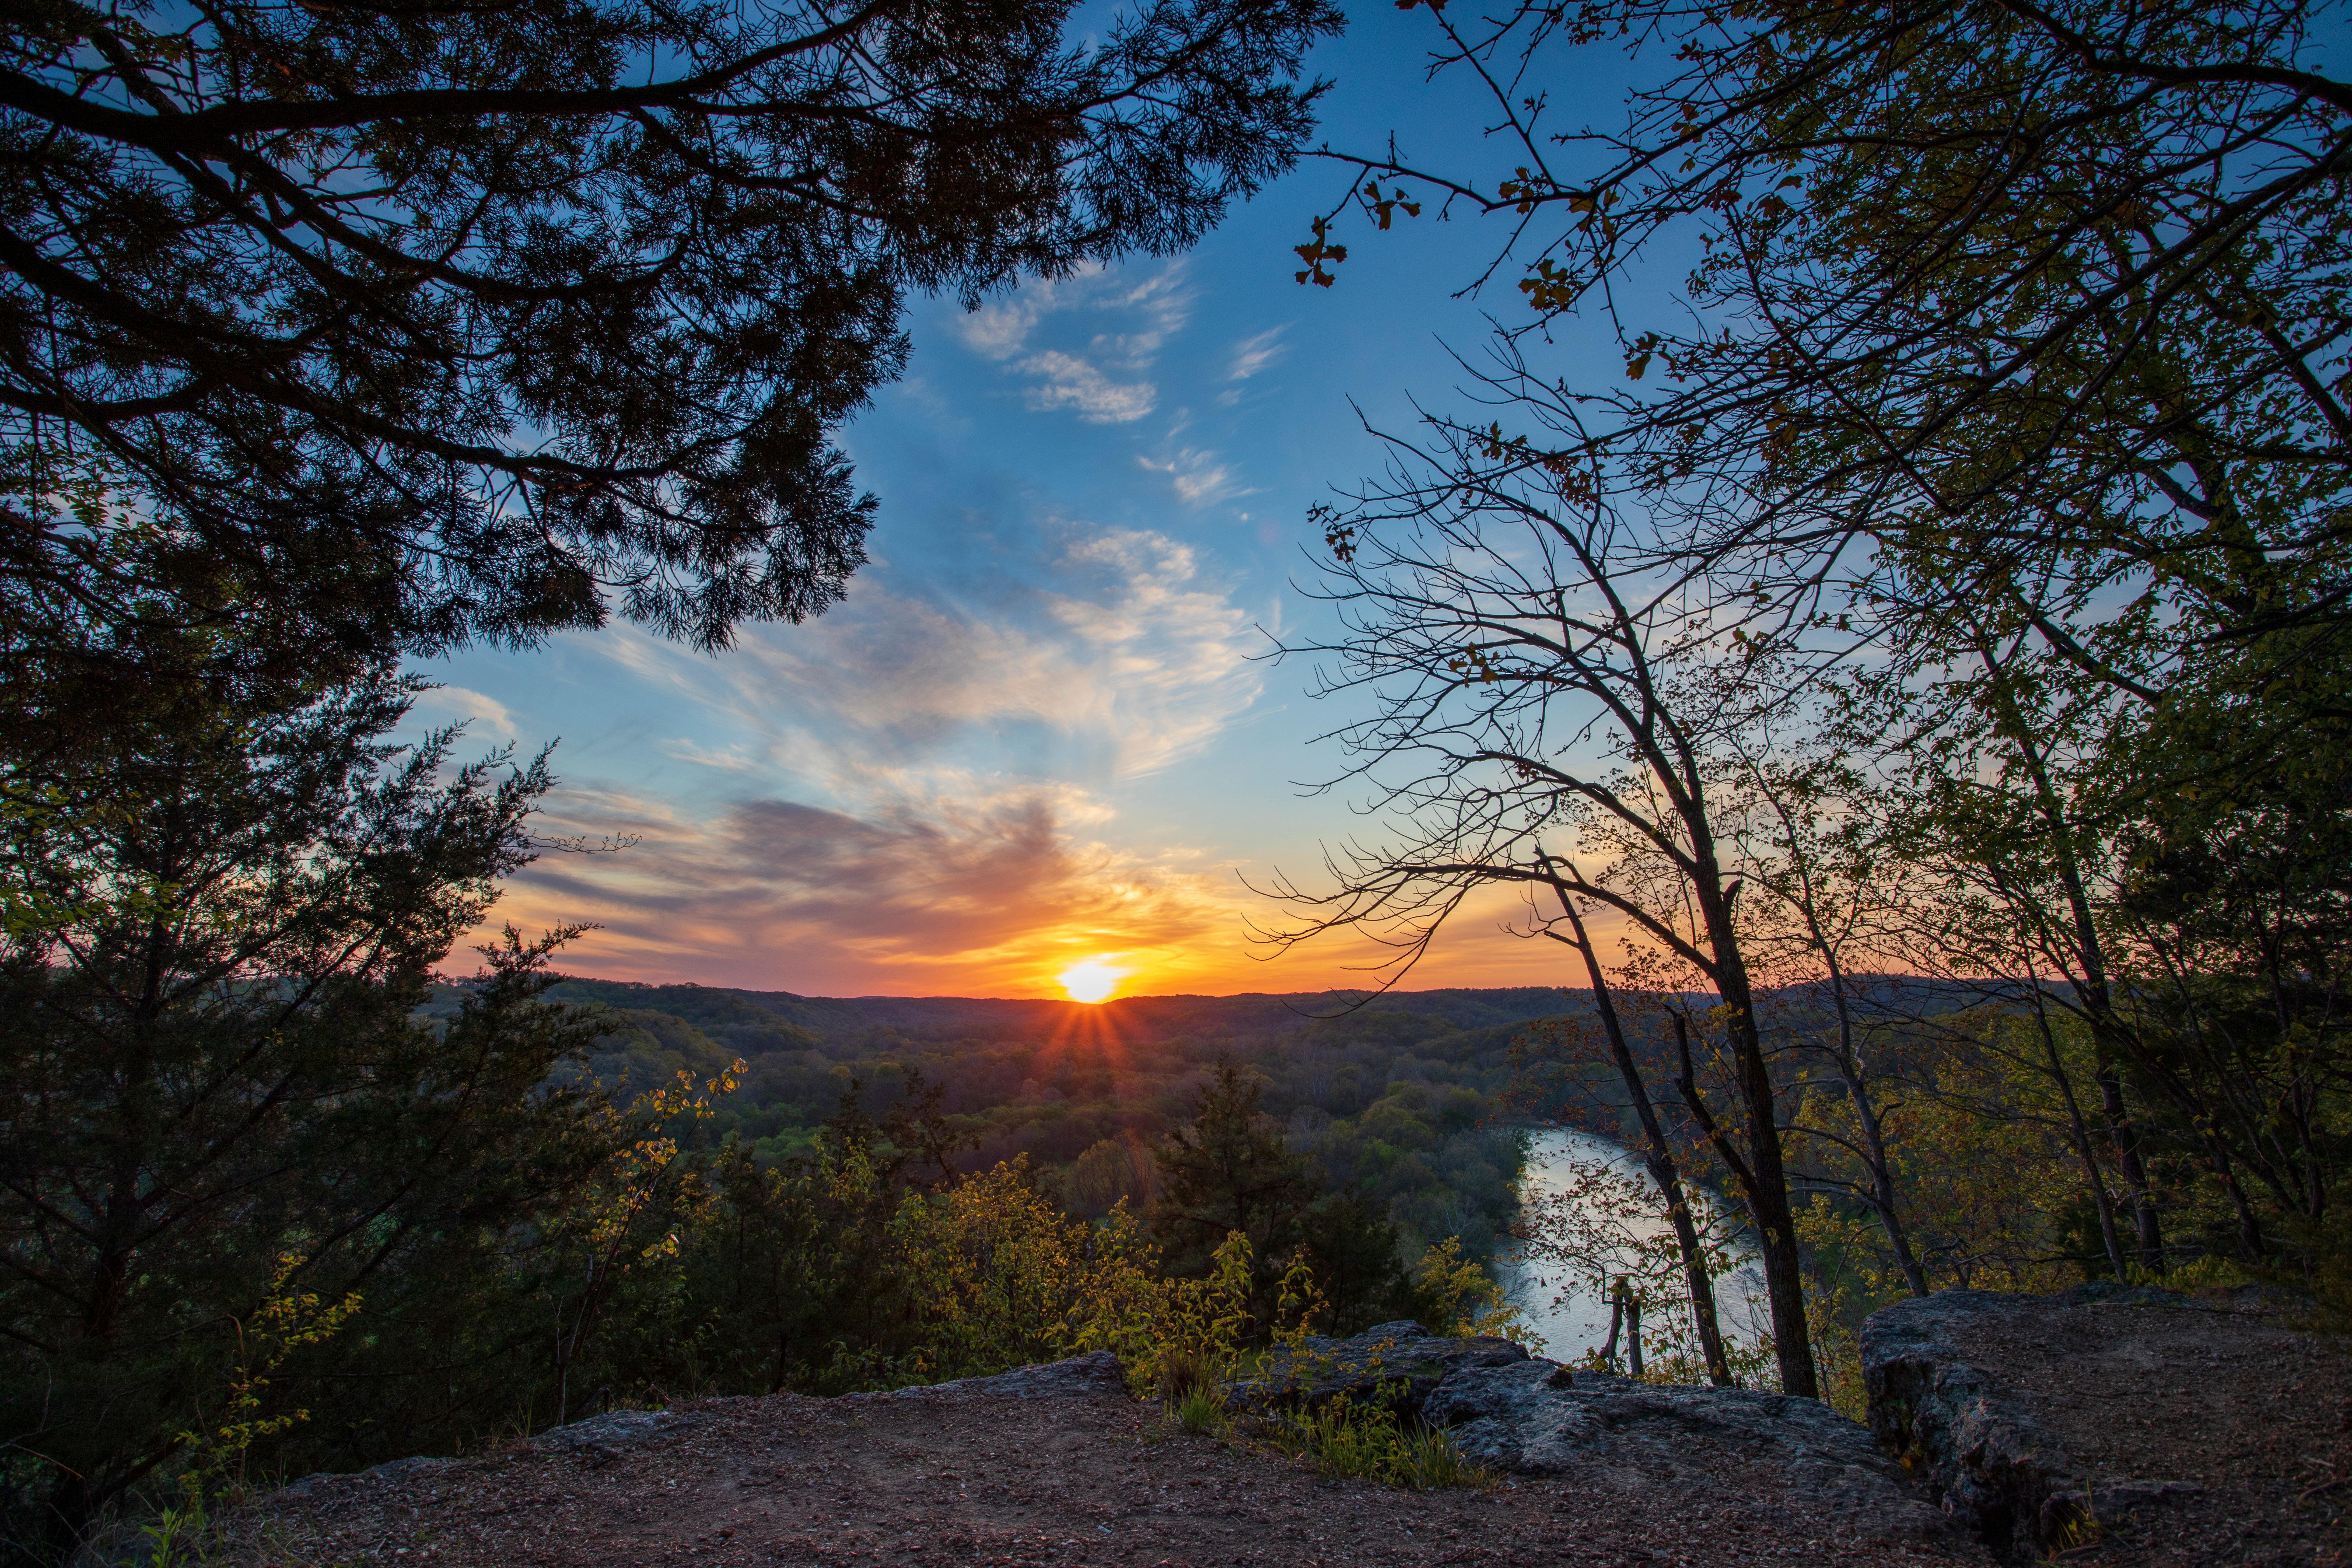 Sunset picture with high vantage point overlooking river with fall colors and sun setting in distanc